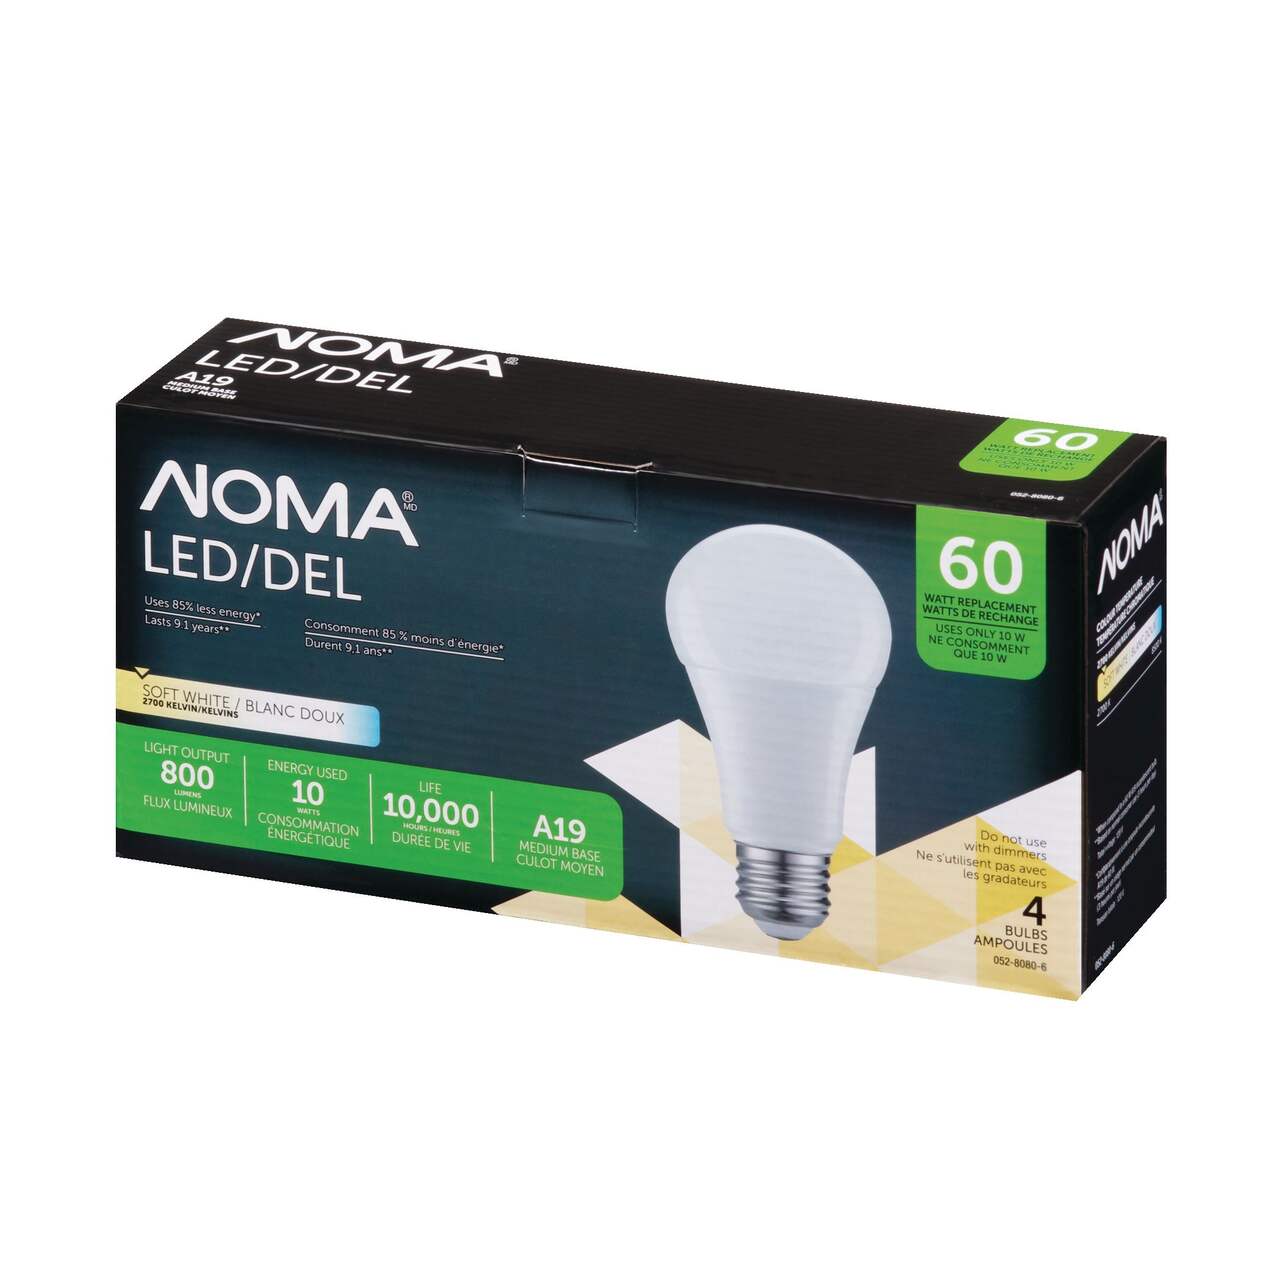 https://media-www.canadiantire.ca/product/fixing/electrical/light-bulbs/0528080/noma-led-a19-bulb-60w-soft-white-4-pack-non-dimmable-5df94c74-390b-431d-9b22-40c6b32ce785-jpgrendition.jpg?imdensity=1&imwidth=1244&impolicy=mZoom